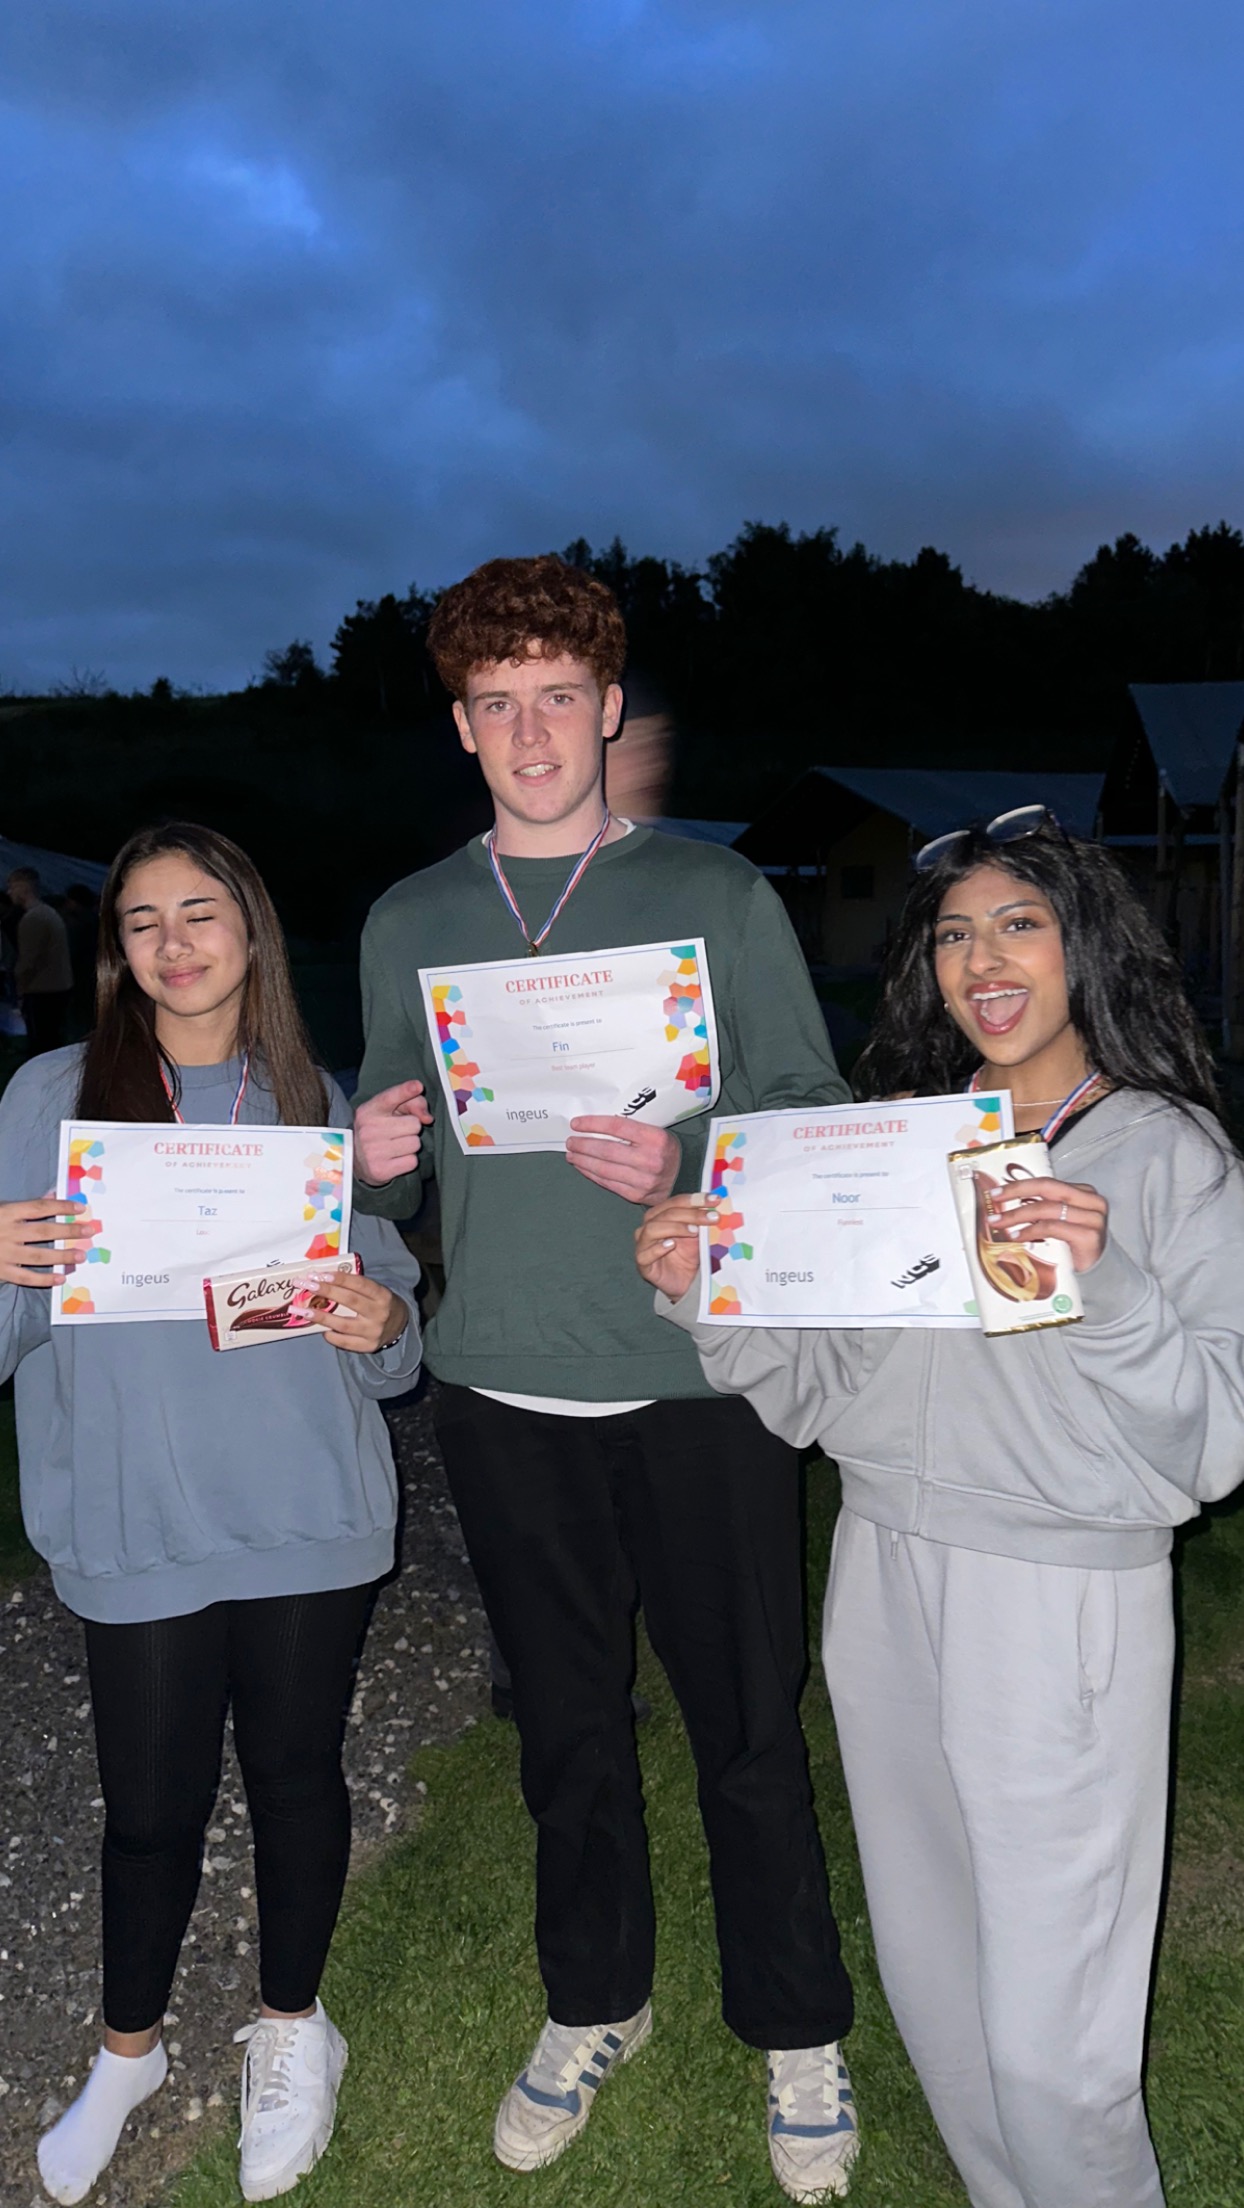 Taz (who is on the left) holds her NCS certificate of achievement. Two friends are next to her and are also holding up their certificates. They are all smiling and celebrating